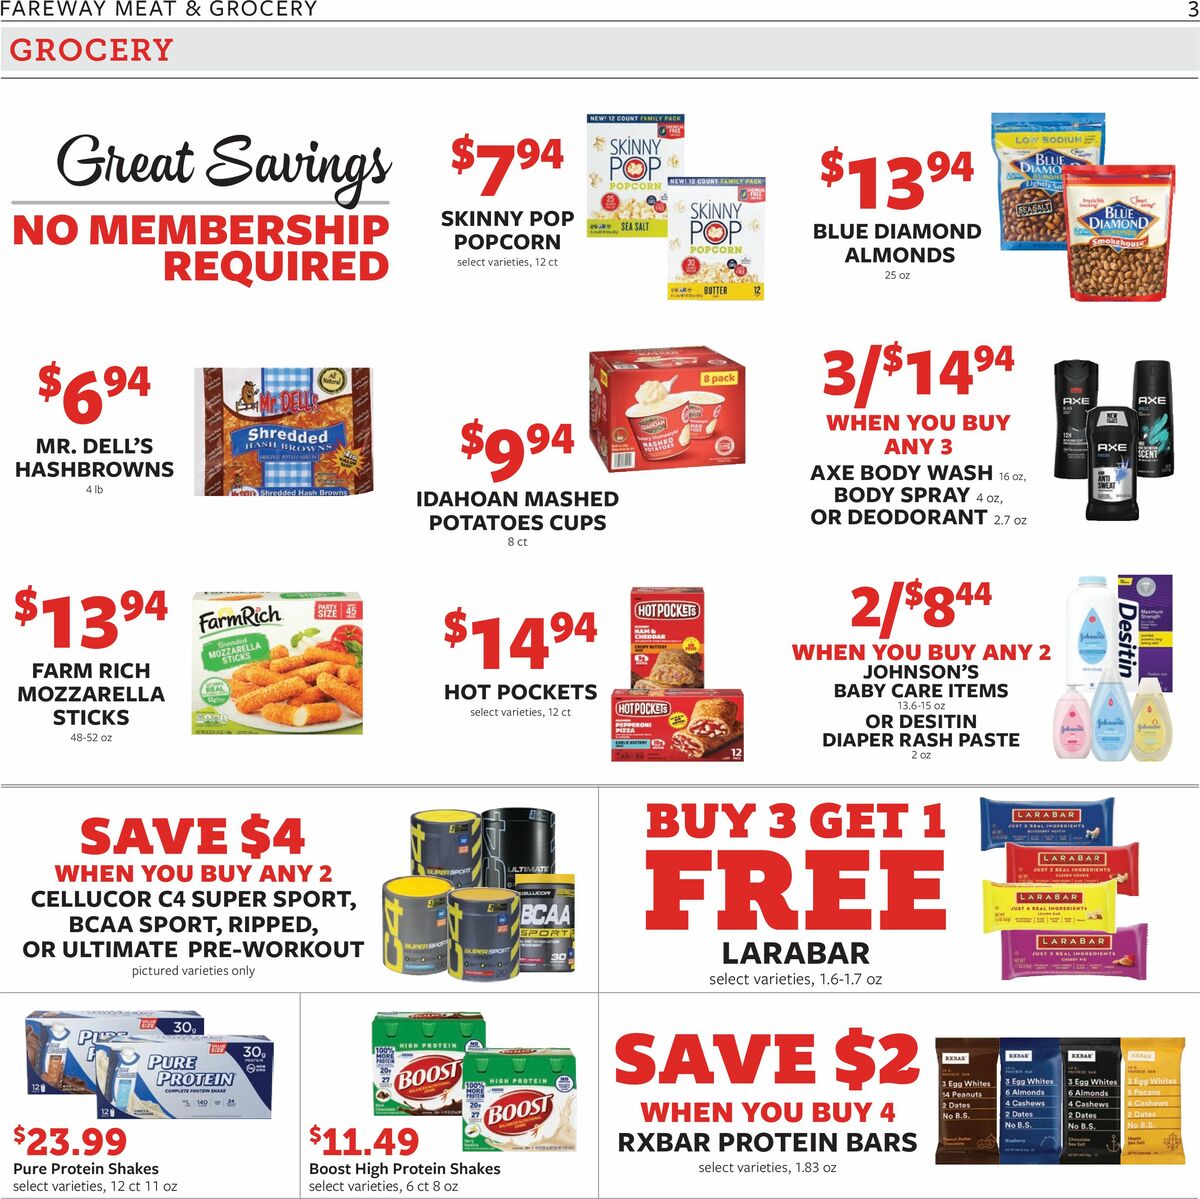 Fareway Weekly Ad from August 21